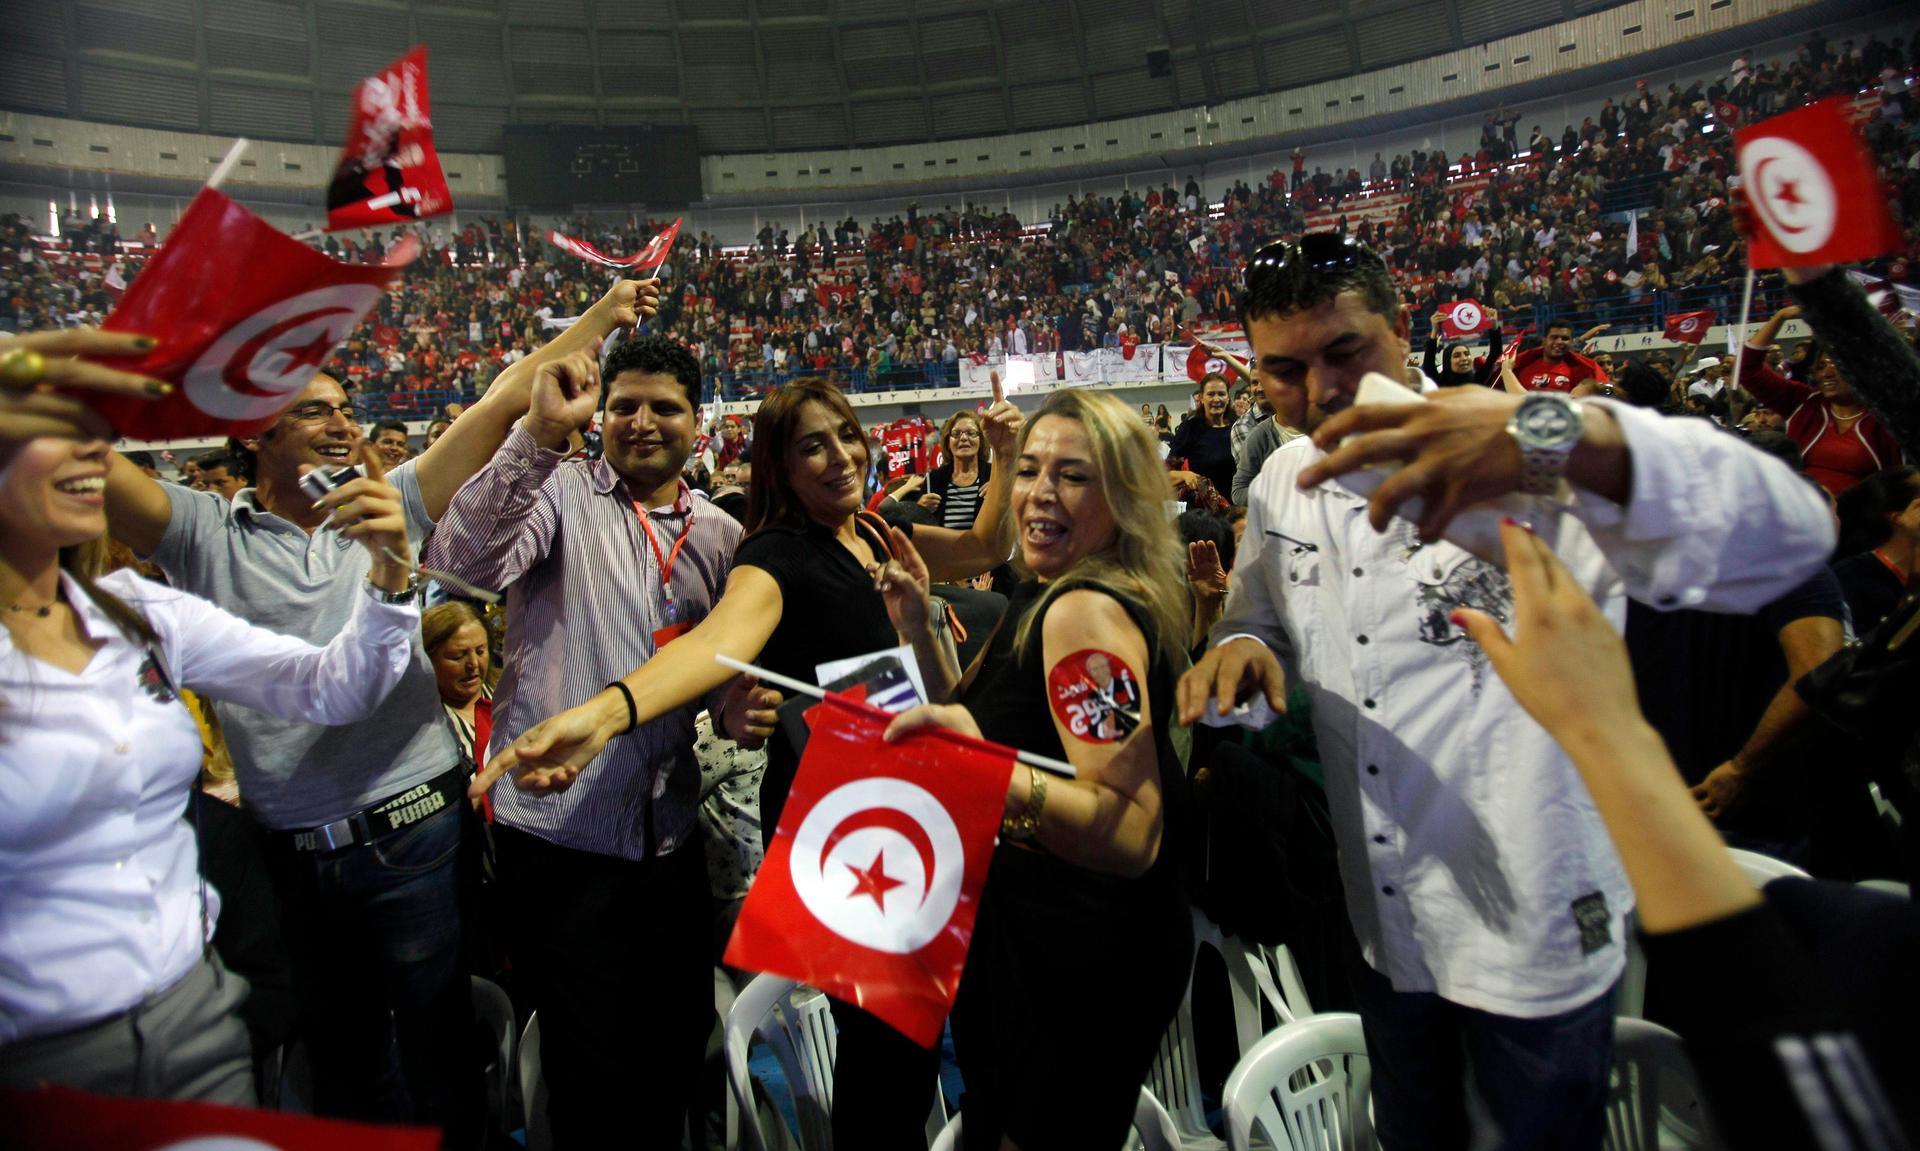 Supporters of Beji Caid Essebsi, the Nidaa Tounes party leader and presidential candidate, wave flags and shout slogans during a presidential electoral campaign rally in Tunis on November 15, 2014. 